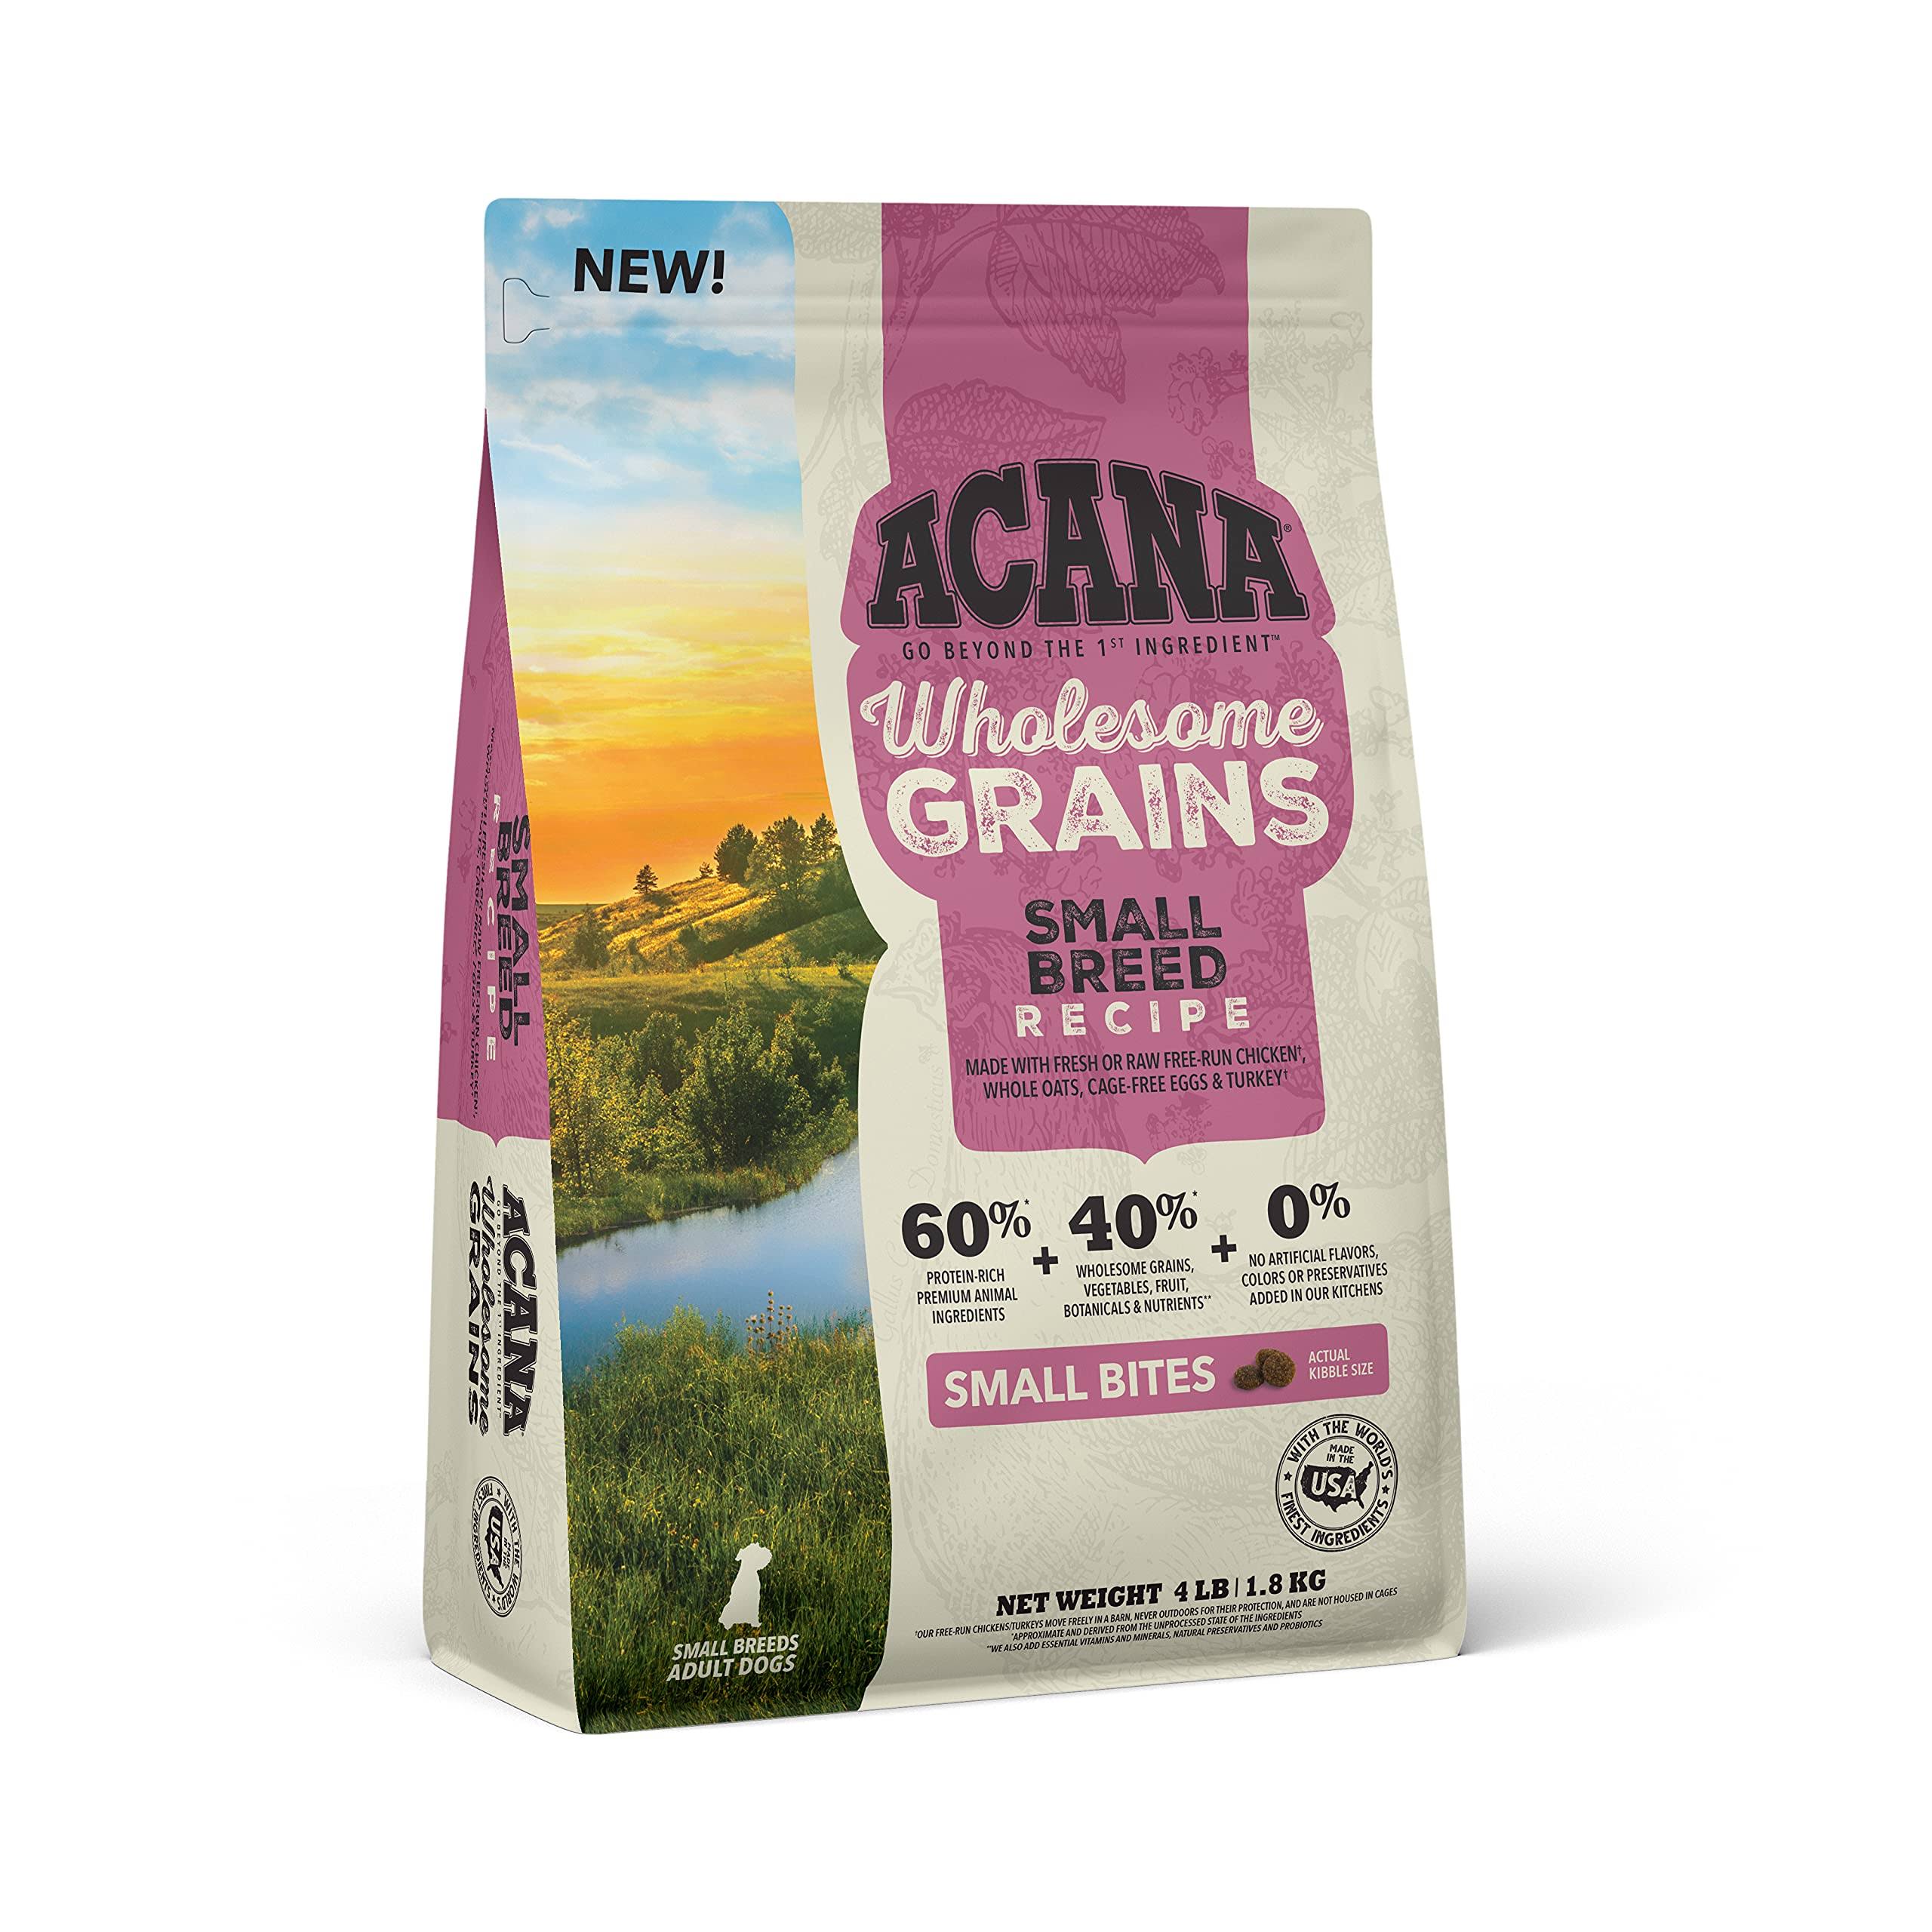 Acana Wholesome Grains Small Breed Recipe Dry Dog Food - 4 lb. Bag